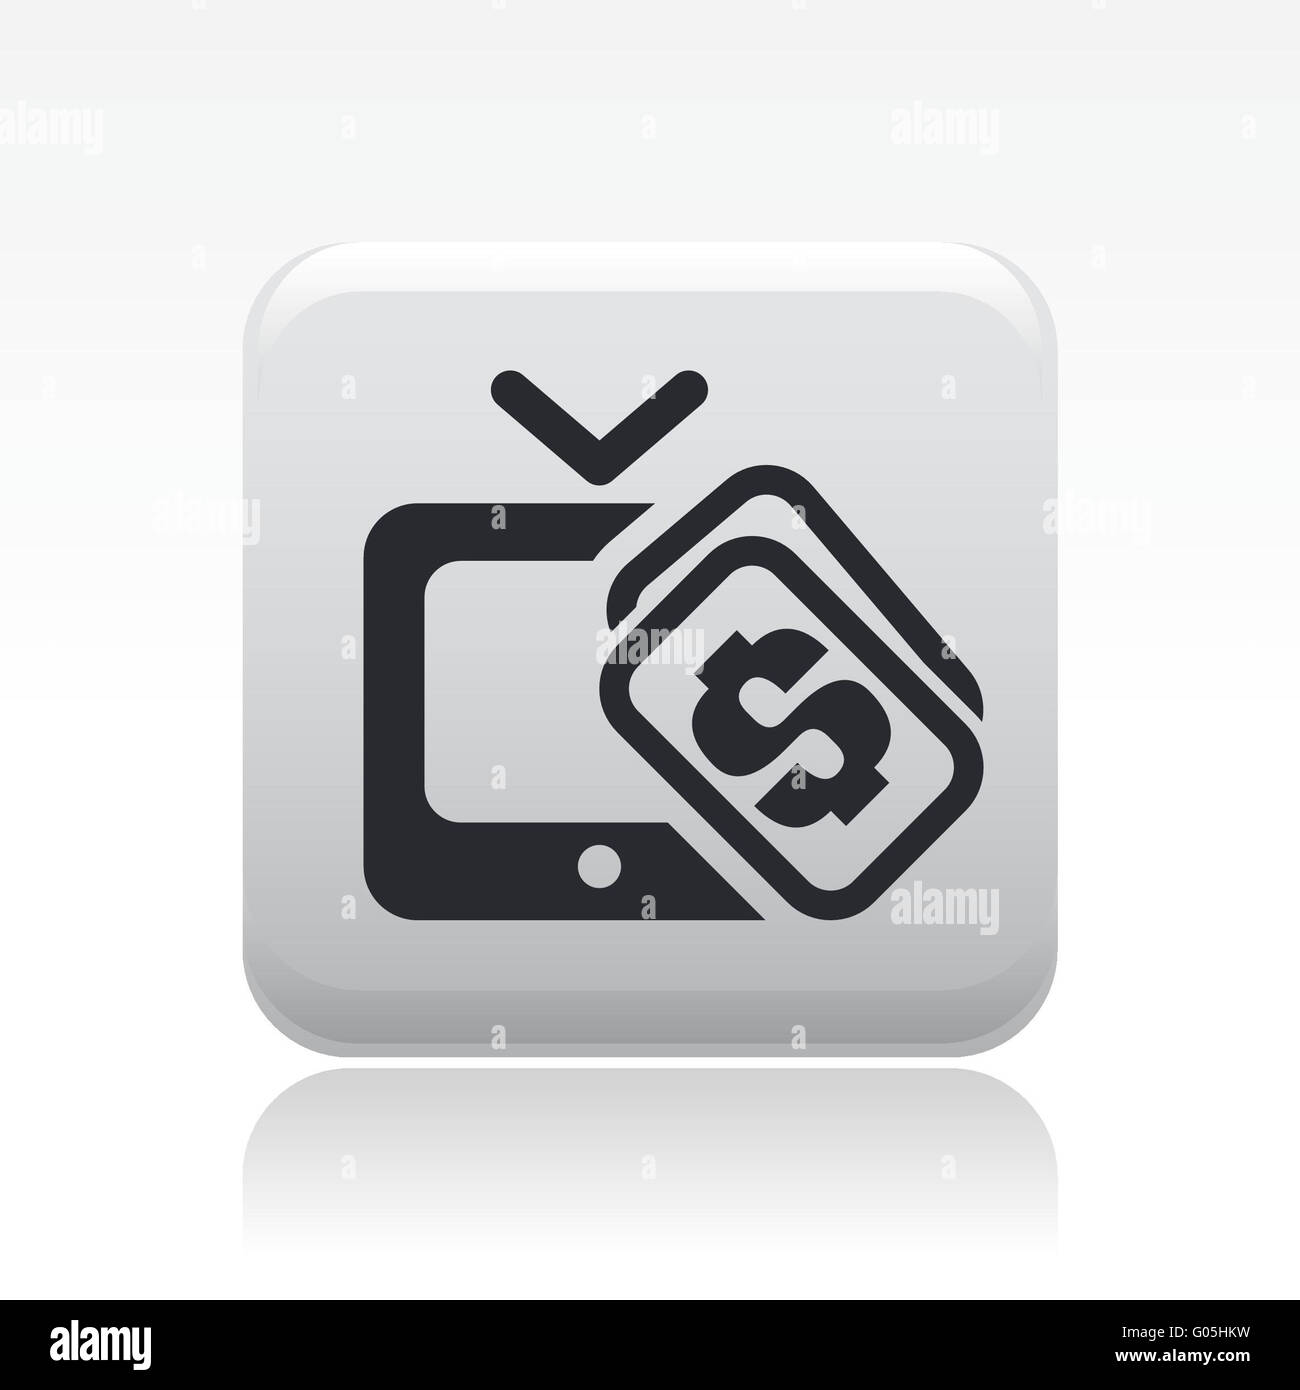 Vector illustration of single pay tv icon Stock Photo